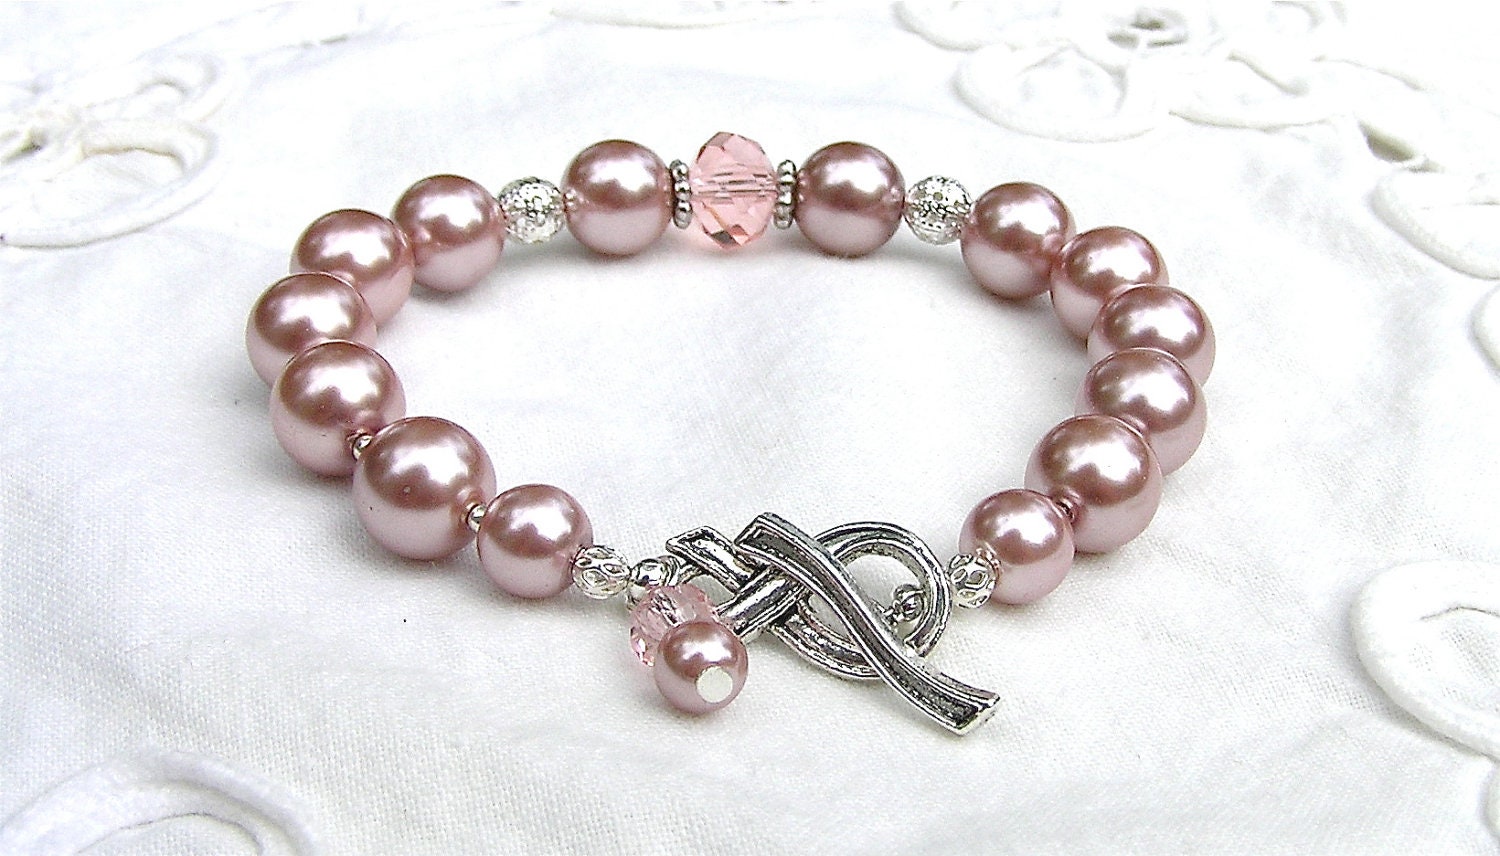 Bracelet PINK Pearls Crystal Silver Filigree & Ribbon Clasp with Charm by Mind4Design